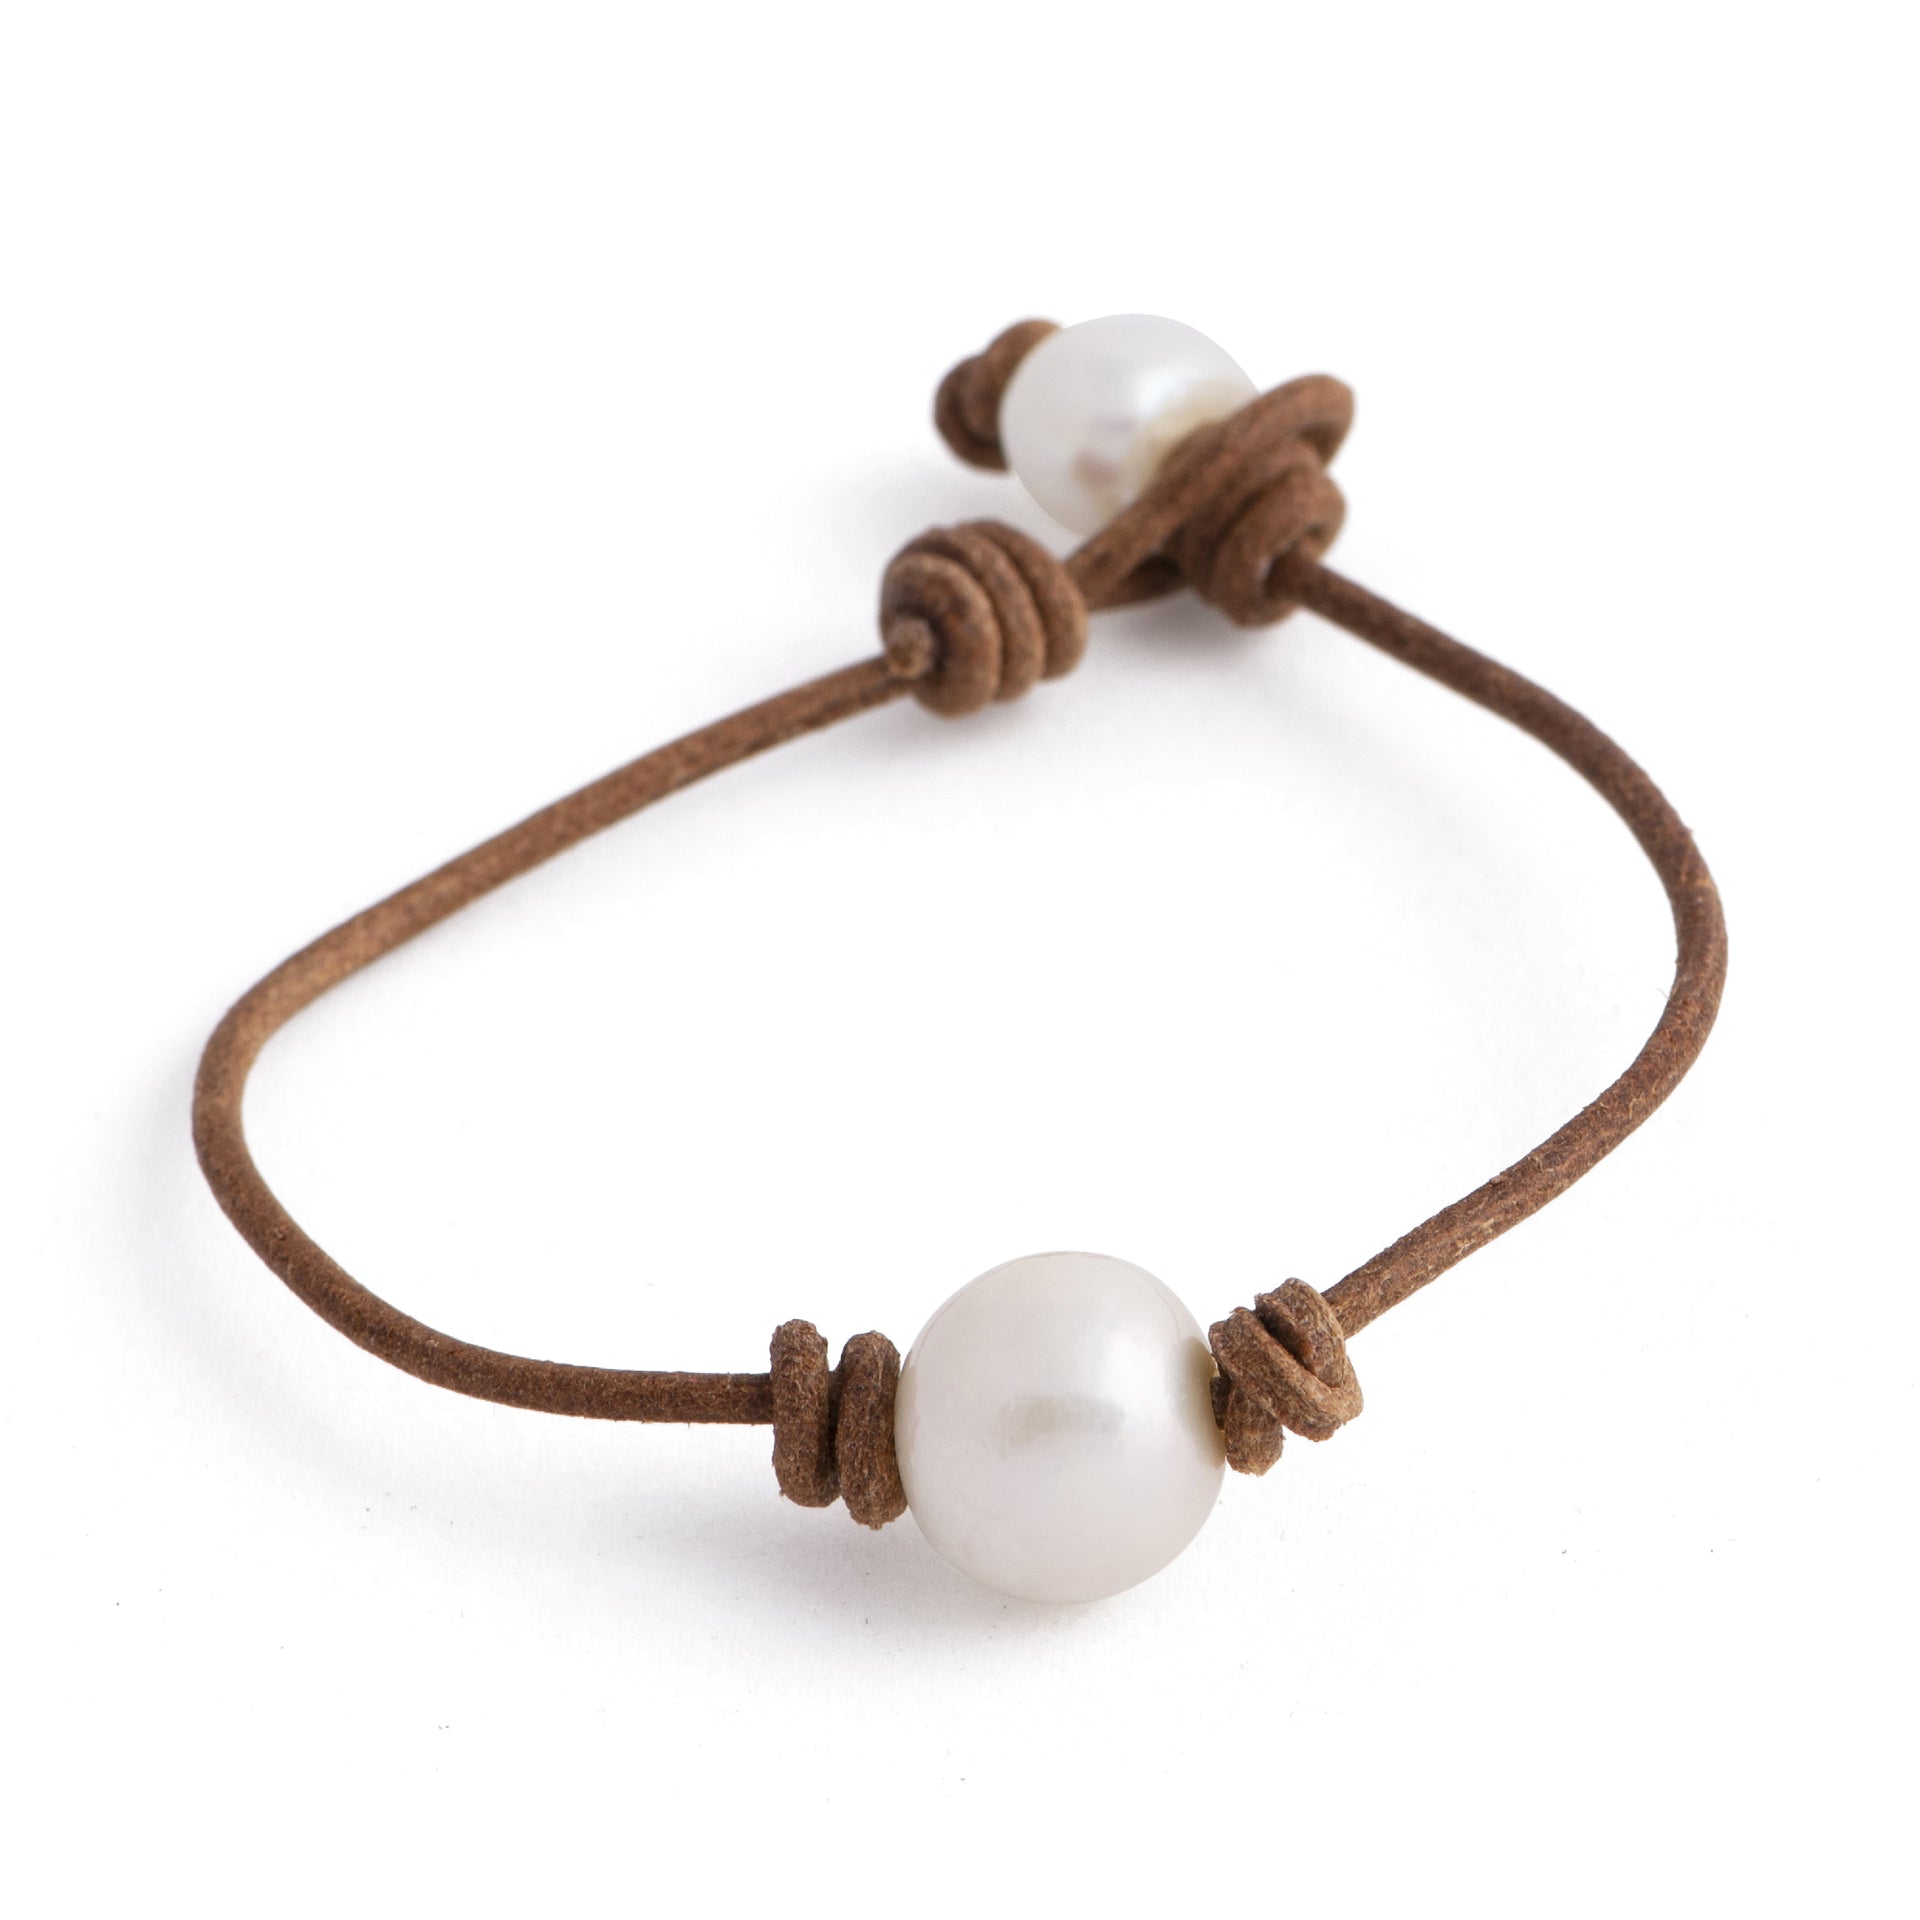 Freshwater Pearl & Knotted Leather Bracelet Kit (Cream pearls